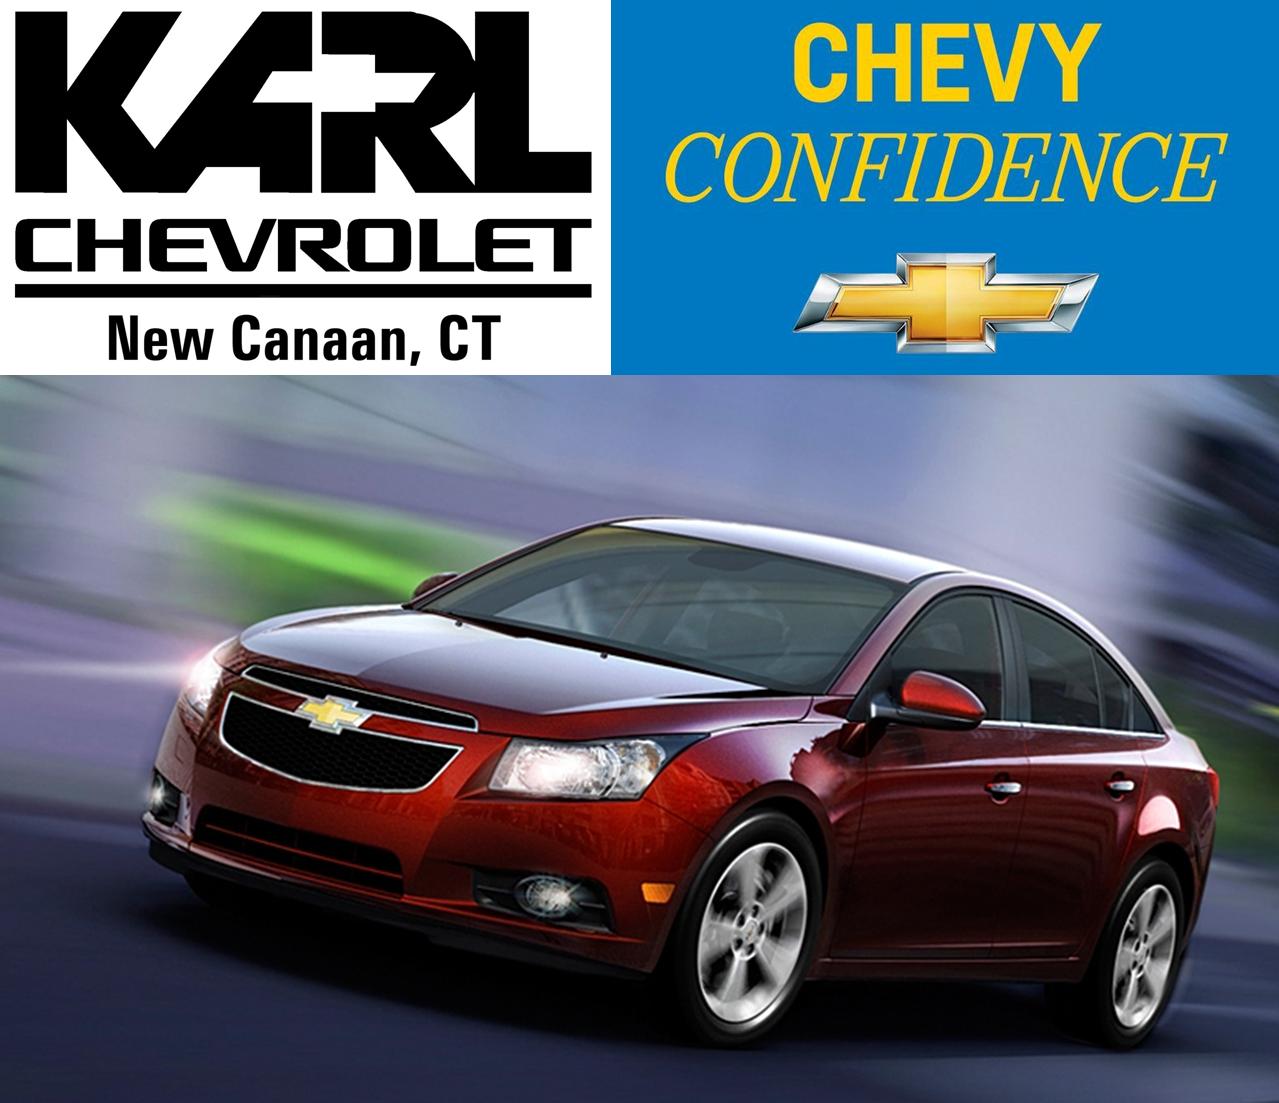 Chevrolet Cruze Limited LT Lease Special Just $149/month at Karl Chevrolet in New Canaan